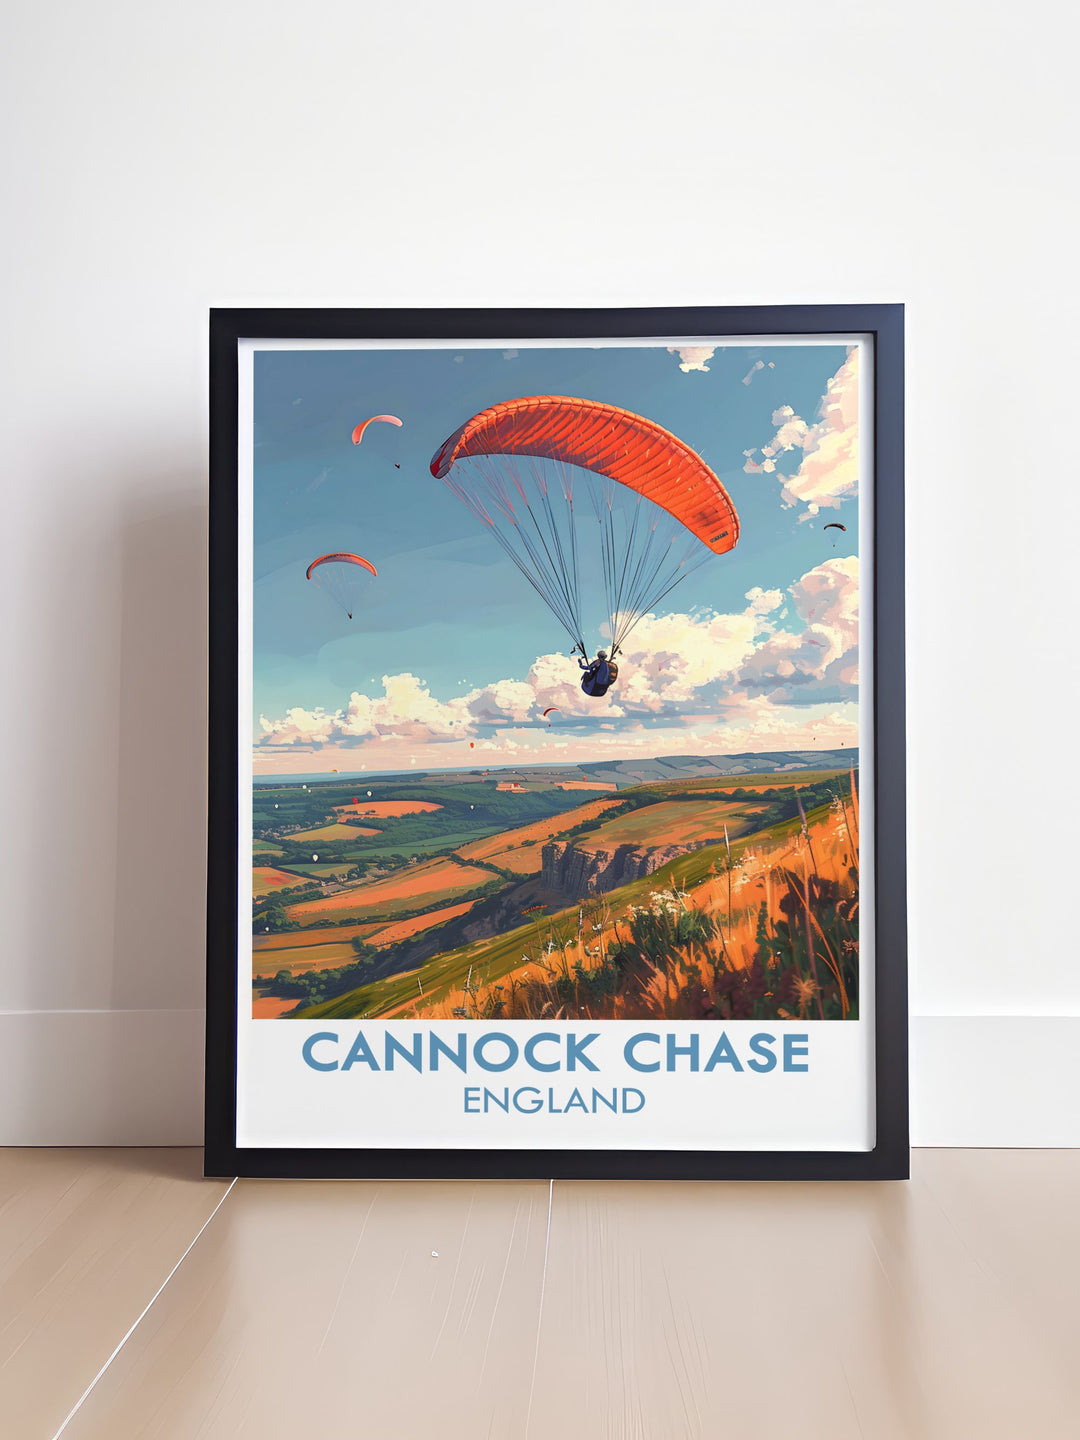 The Chase prints are ideal for transforming your living space. Featuring the picturesque landscapes of Cannock Chase, this artwork brings the beauty of British nature indoors. Perfect for nature lovers and those who appreciate the English countryside.